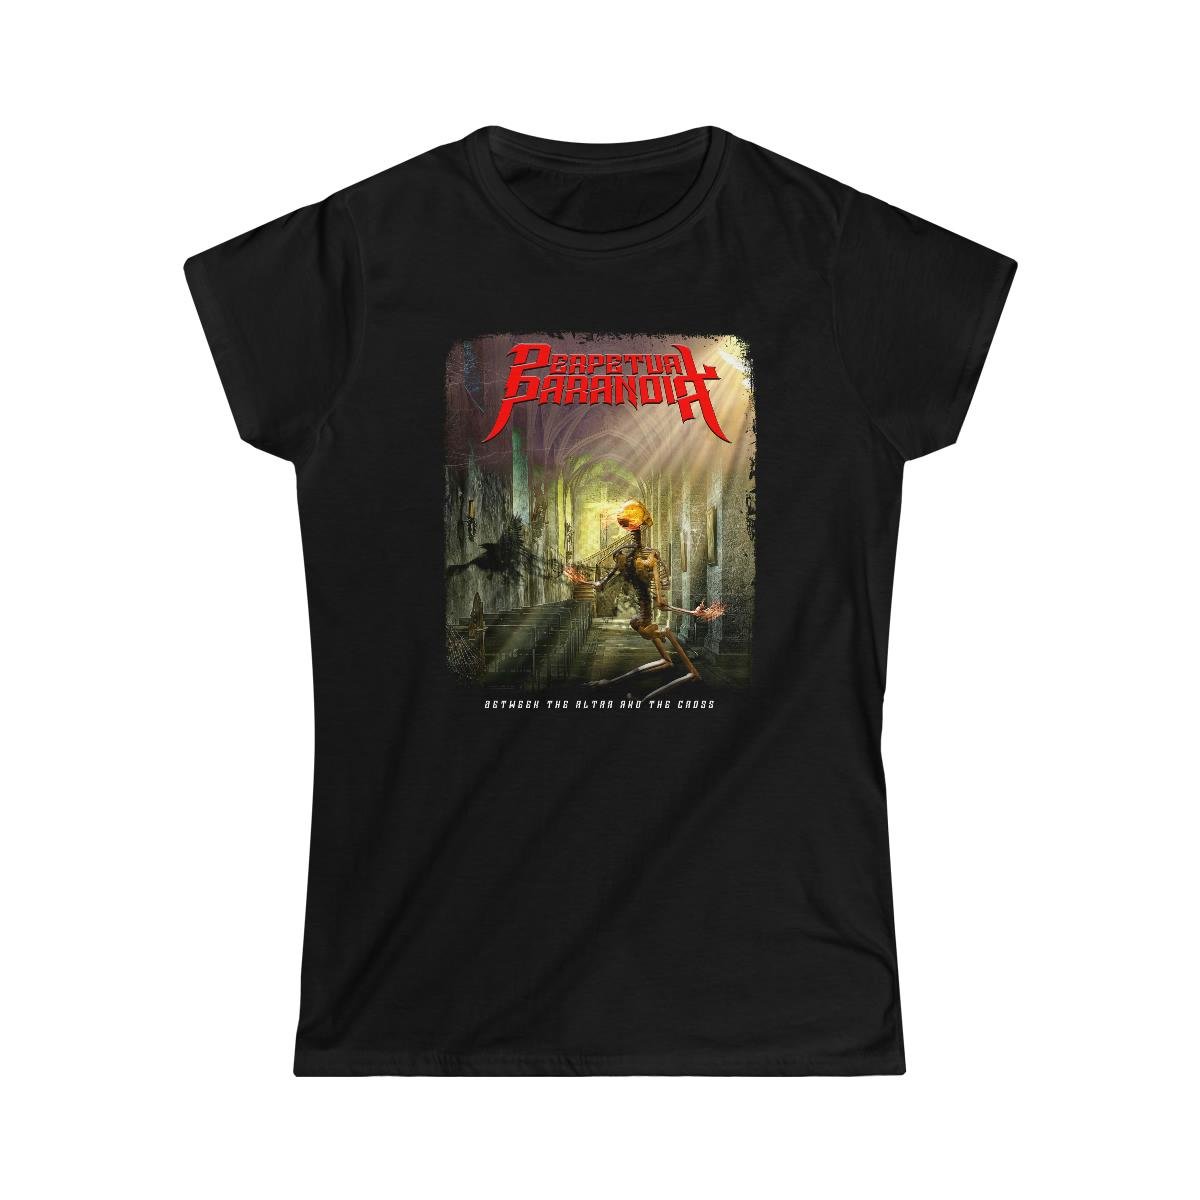 Perpetual Paranoia – Between the Altar And the Cross Women’s Tshirt